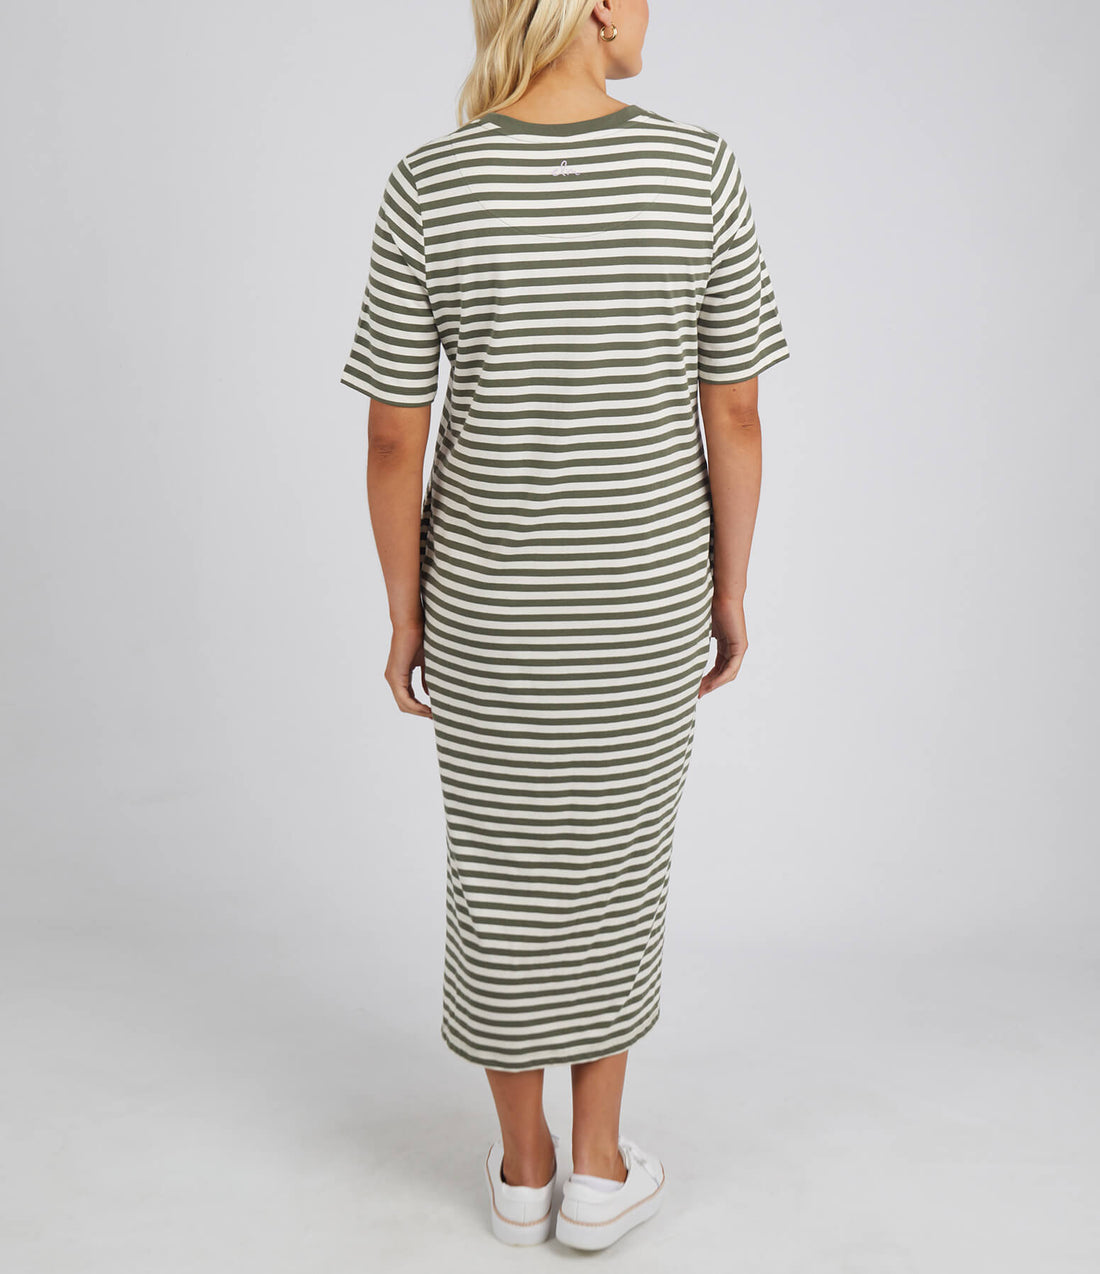 Merry Tee Dress - Clover and Pearl Stripe